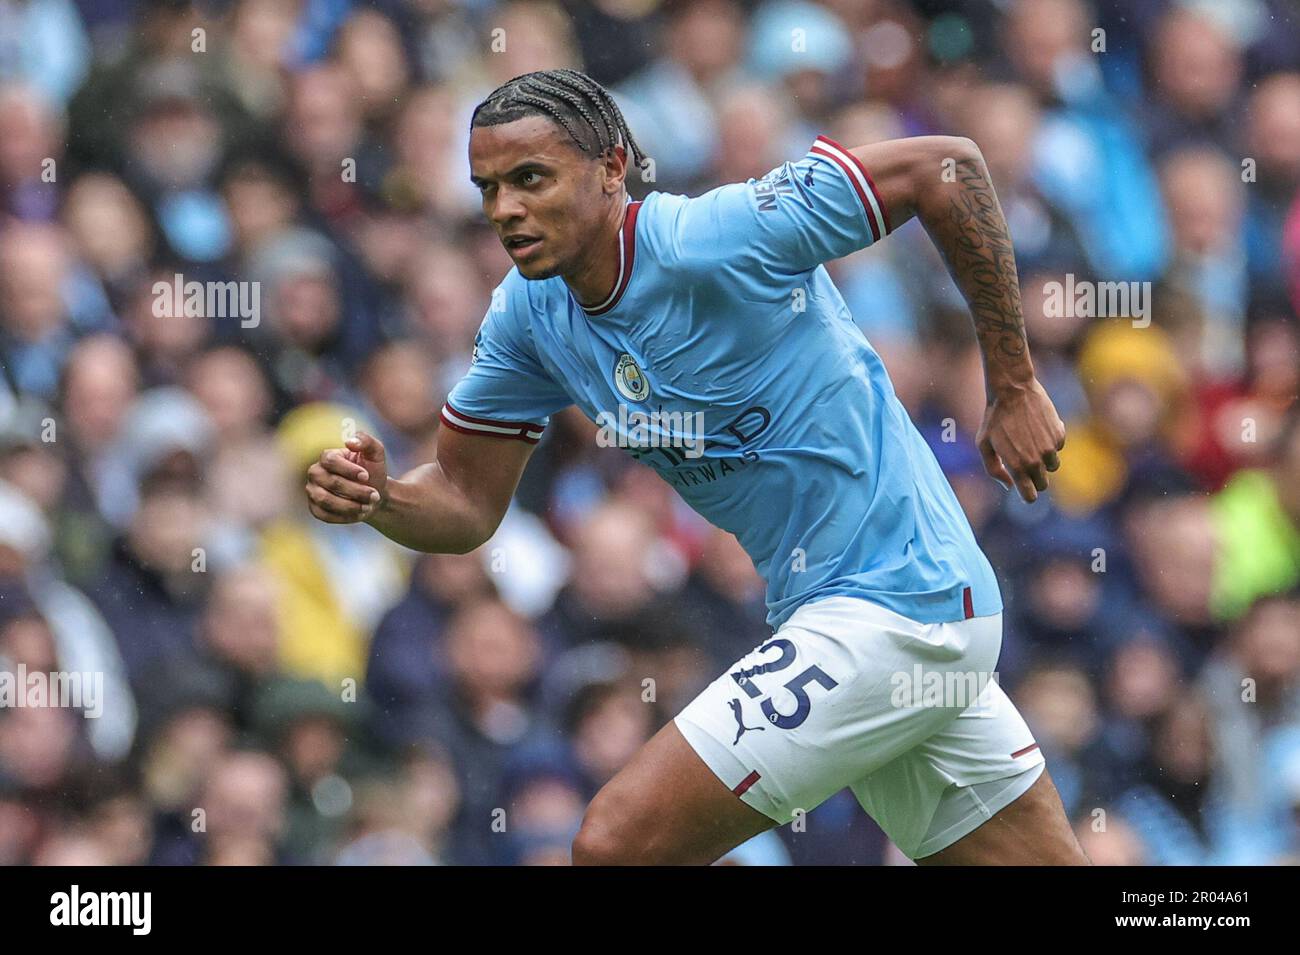 Manuel Akanji #25 of Manchester City during the Premier League